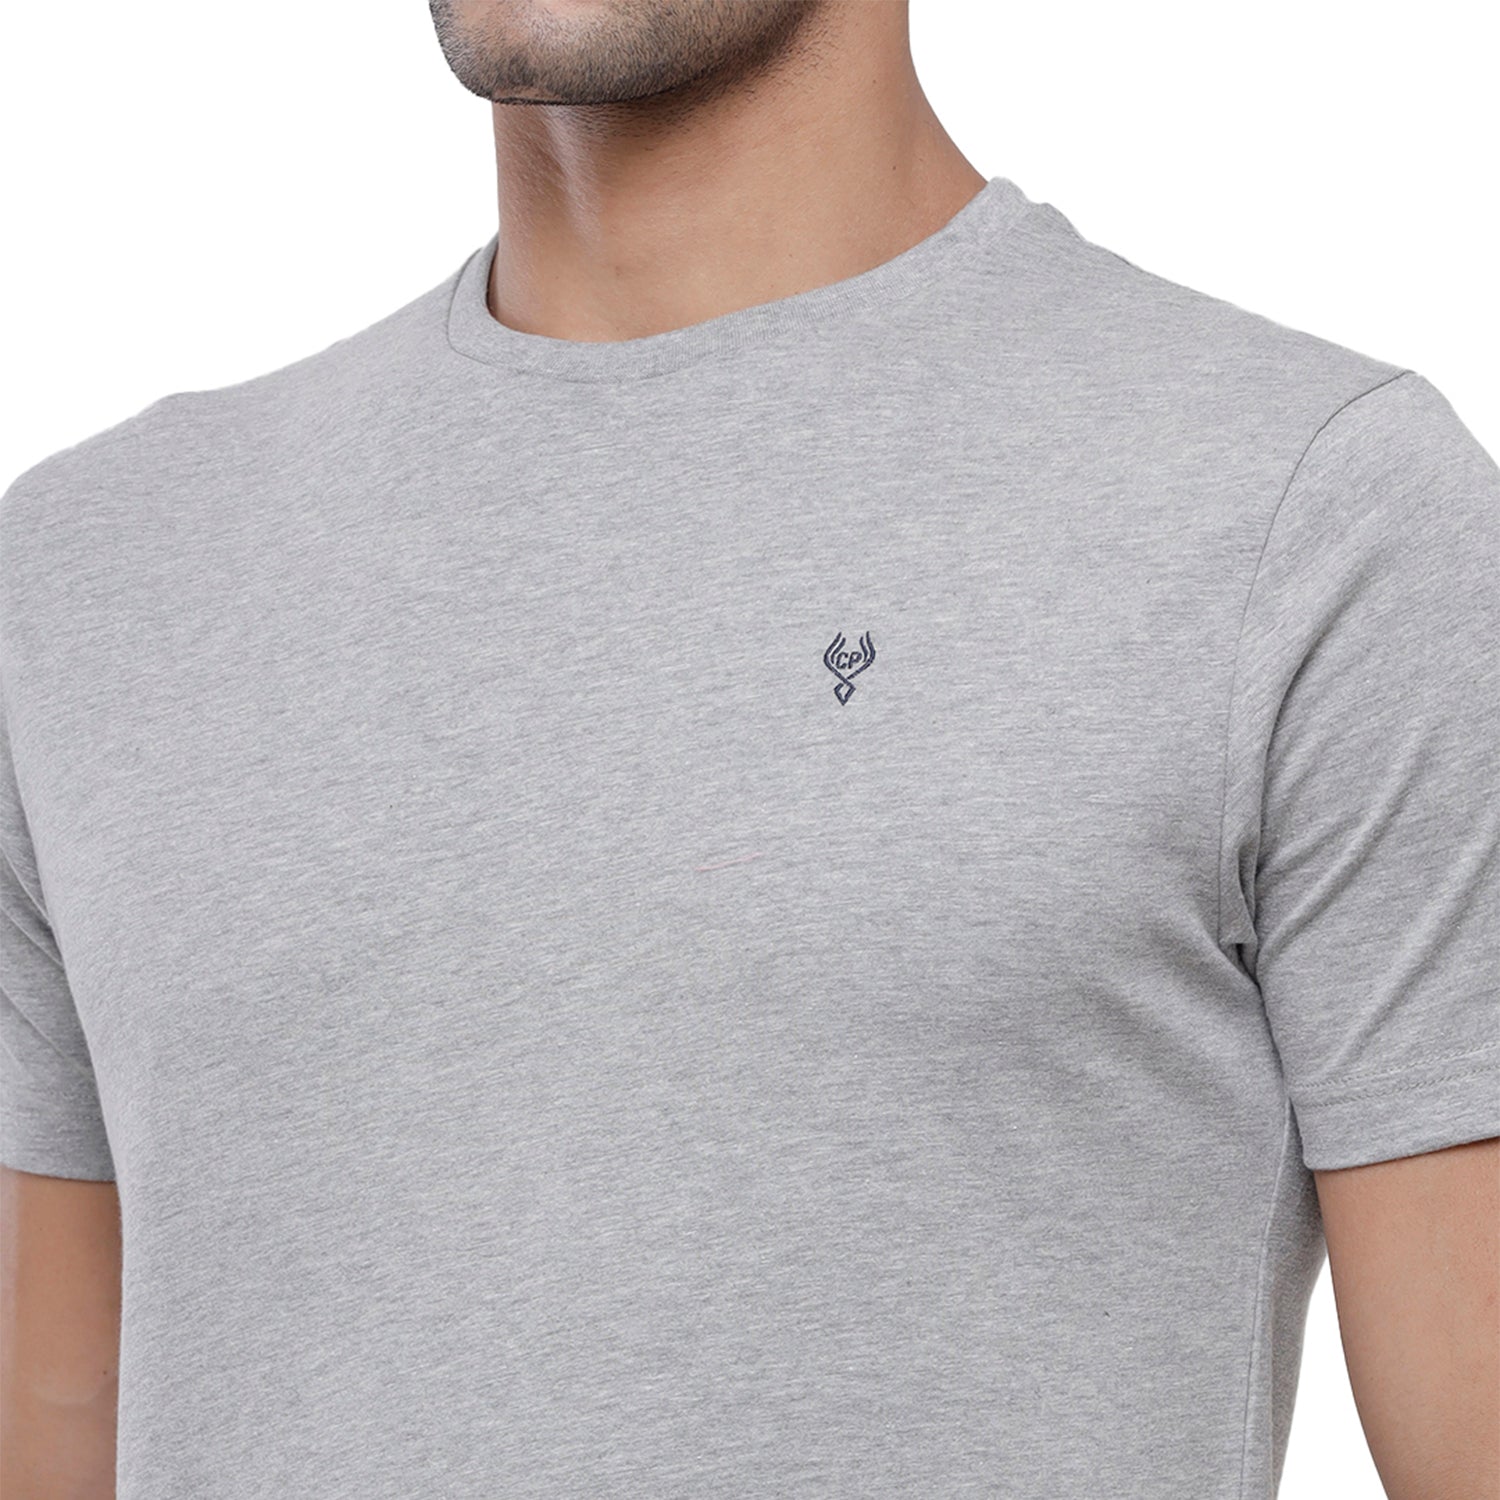 Classic Polo Men's Solid Single Jersey Light Grey Half Sleeve Slim Fit T-Shirt - Kore-10 T-shirt Classic Polo 